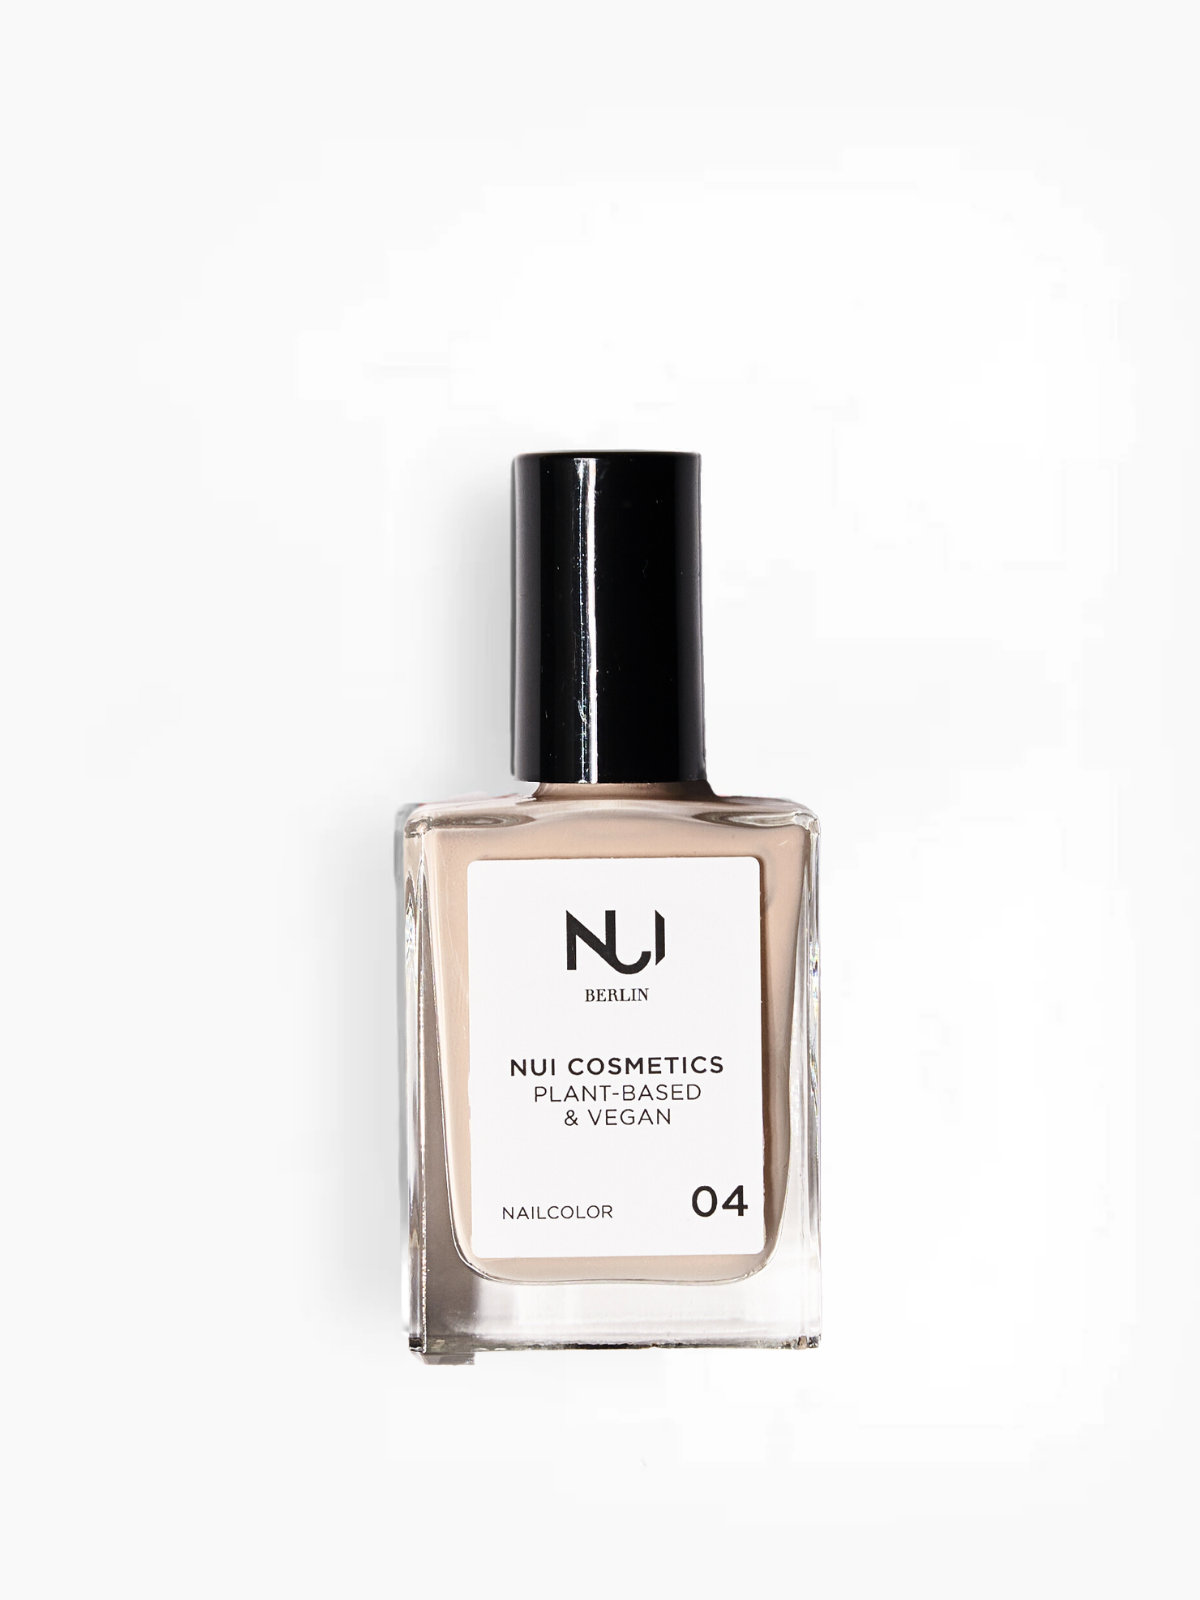 NUI_Nailcolor_04_Sand_Website_1.png